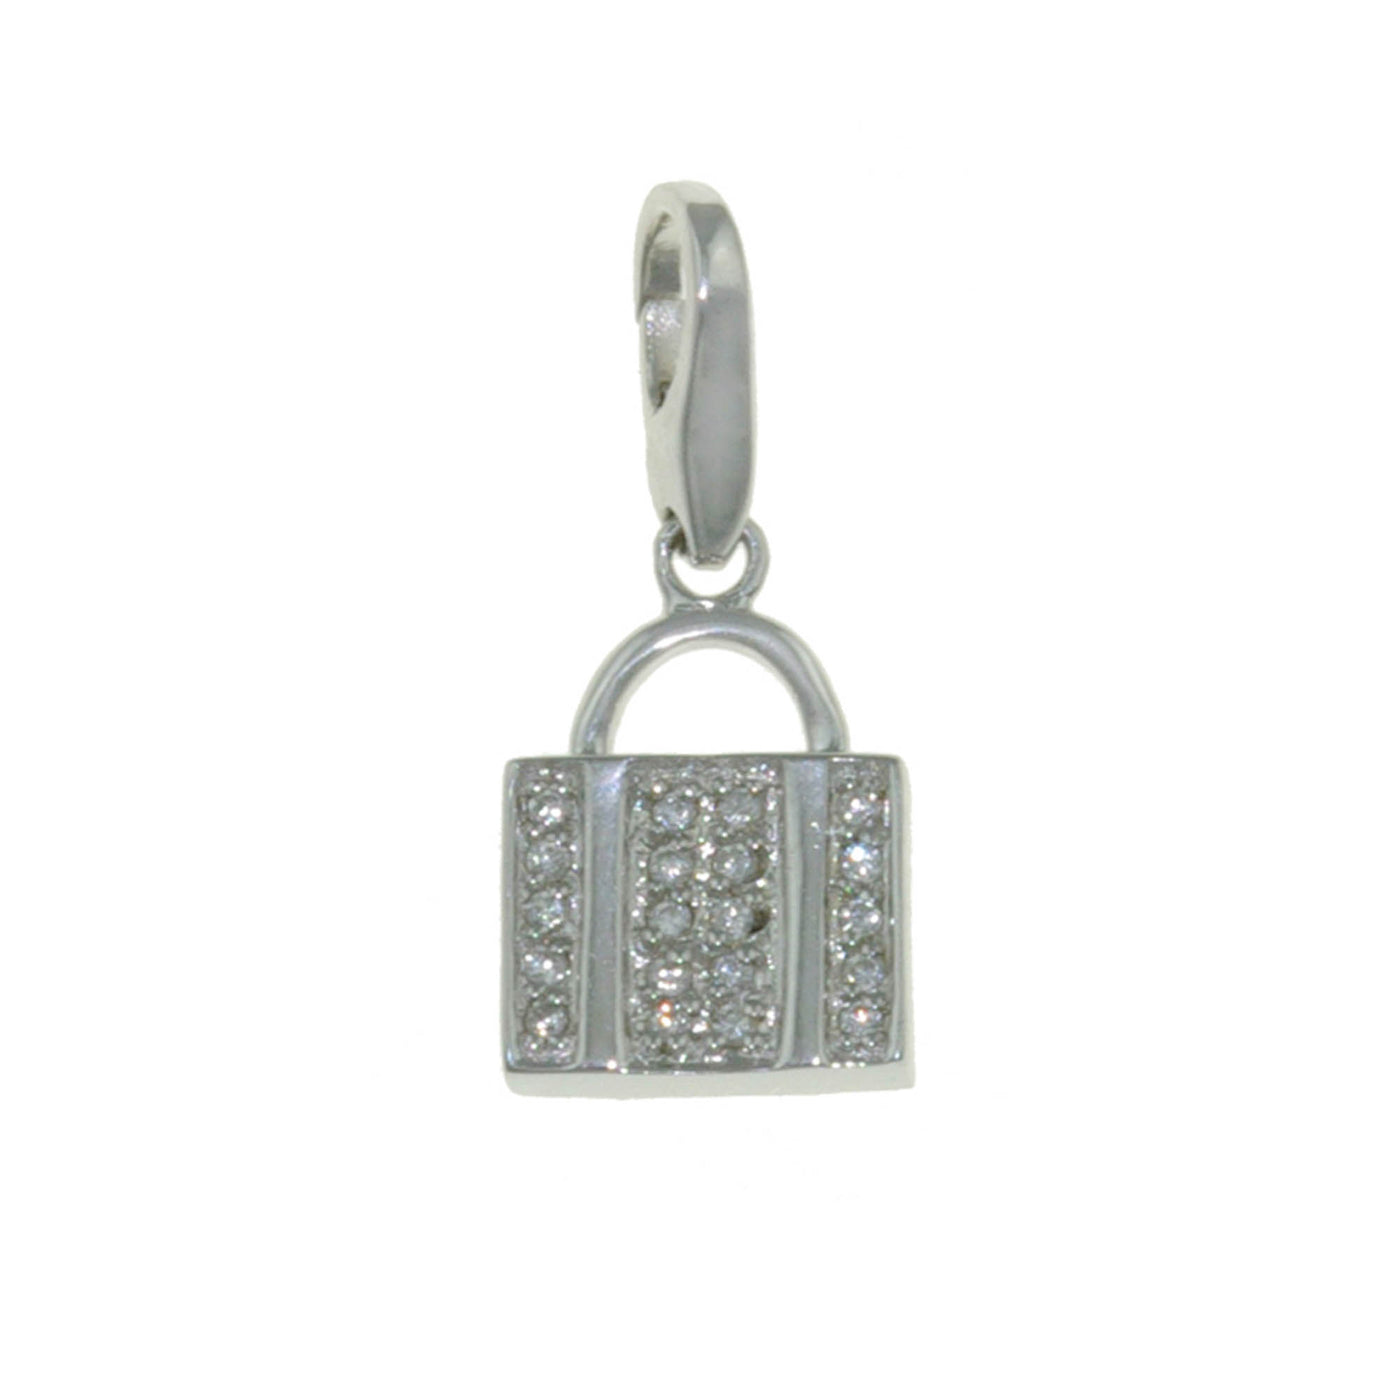 Rebecca Sloane Sterling Silver Briefcase With Cz Charm